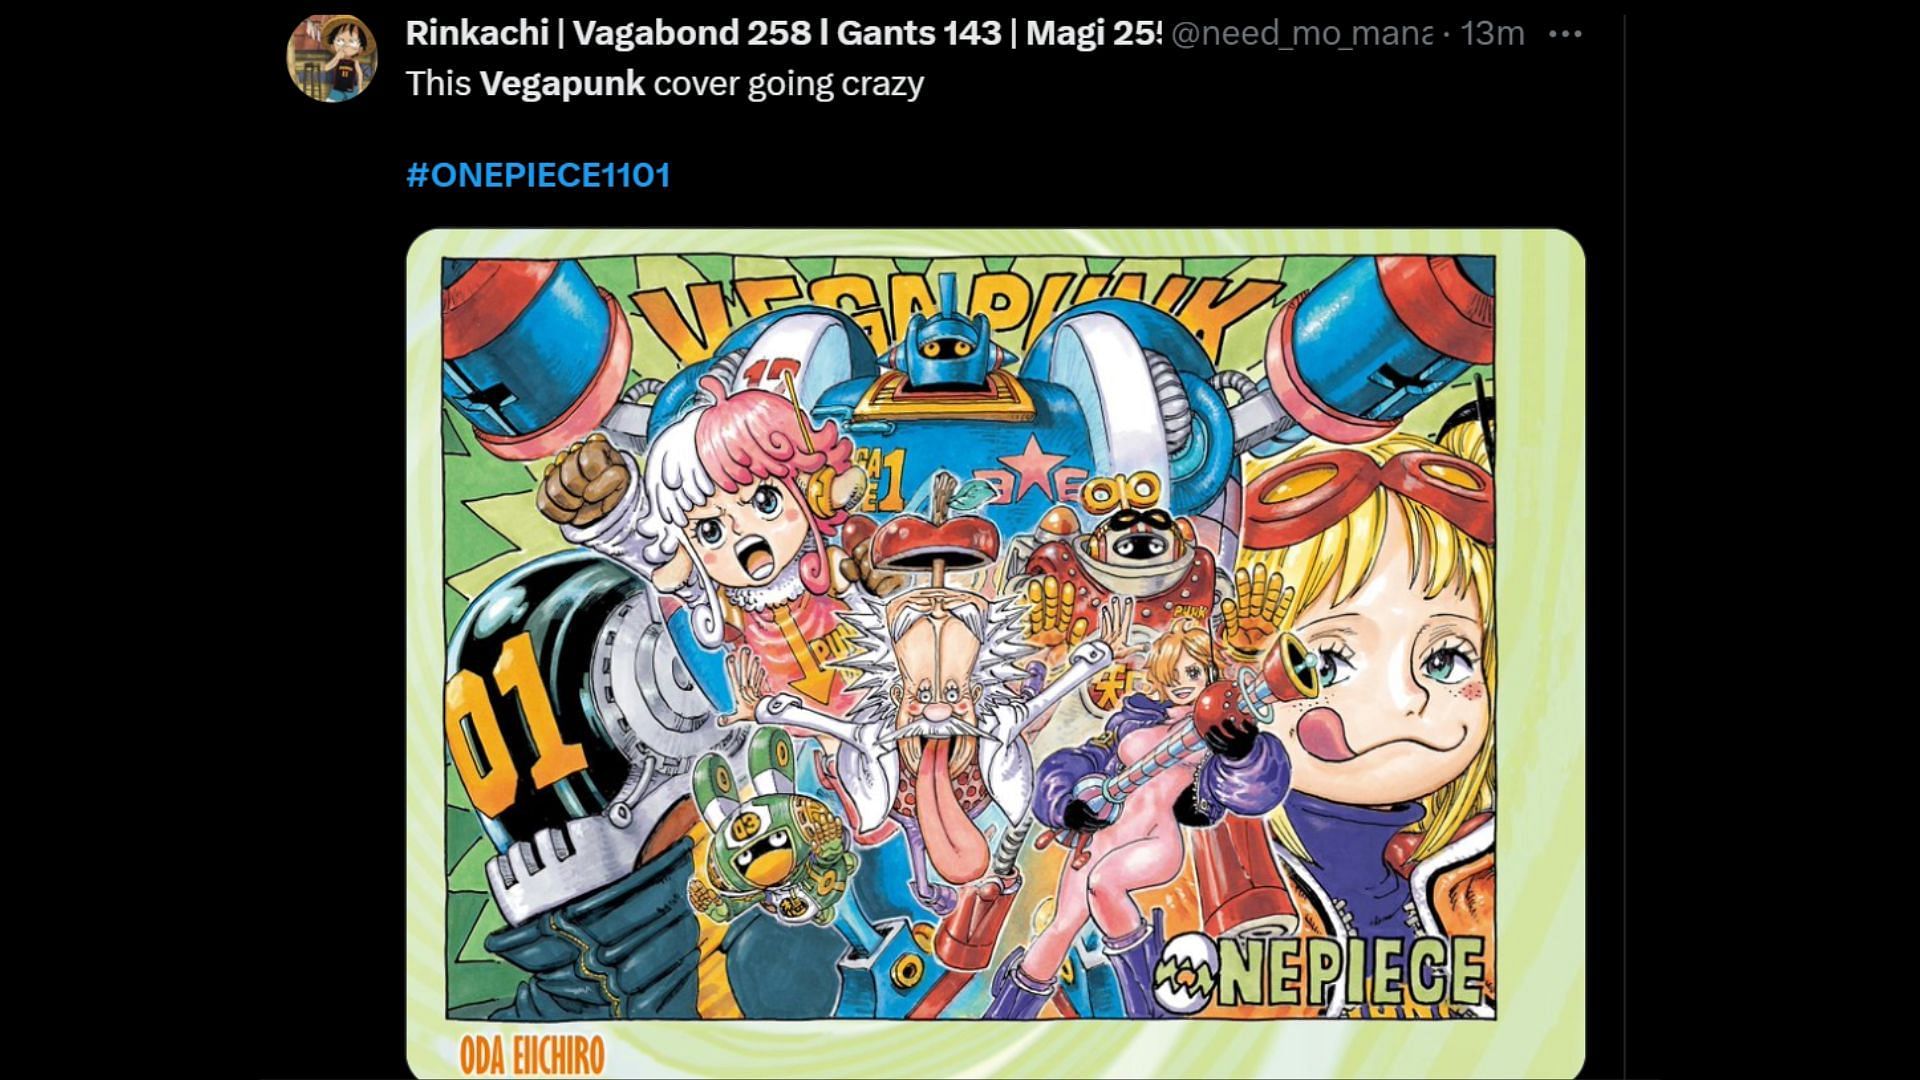 One Piece chapter 1101 cover featuring Vegapunk and his satellites (Image via X/@need_mo_mana)